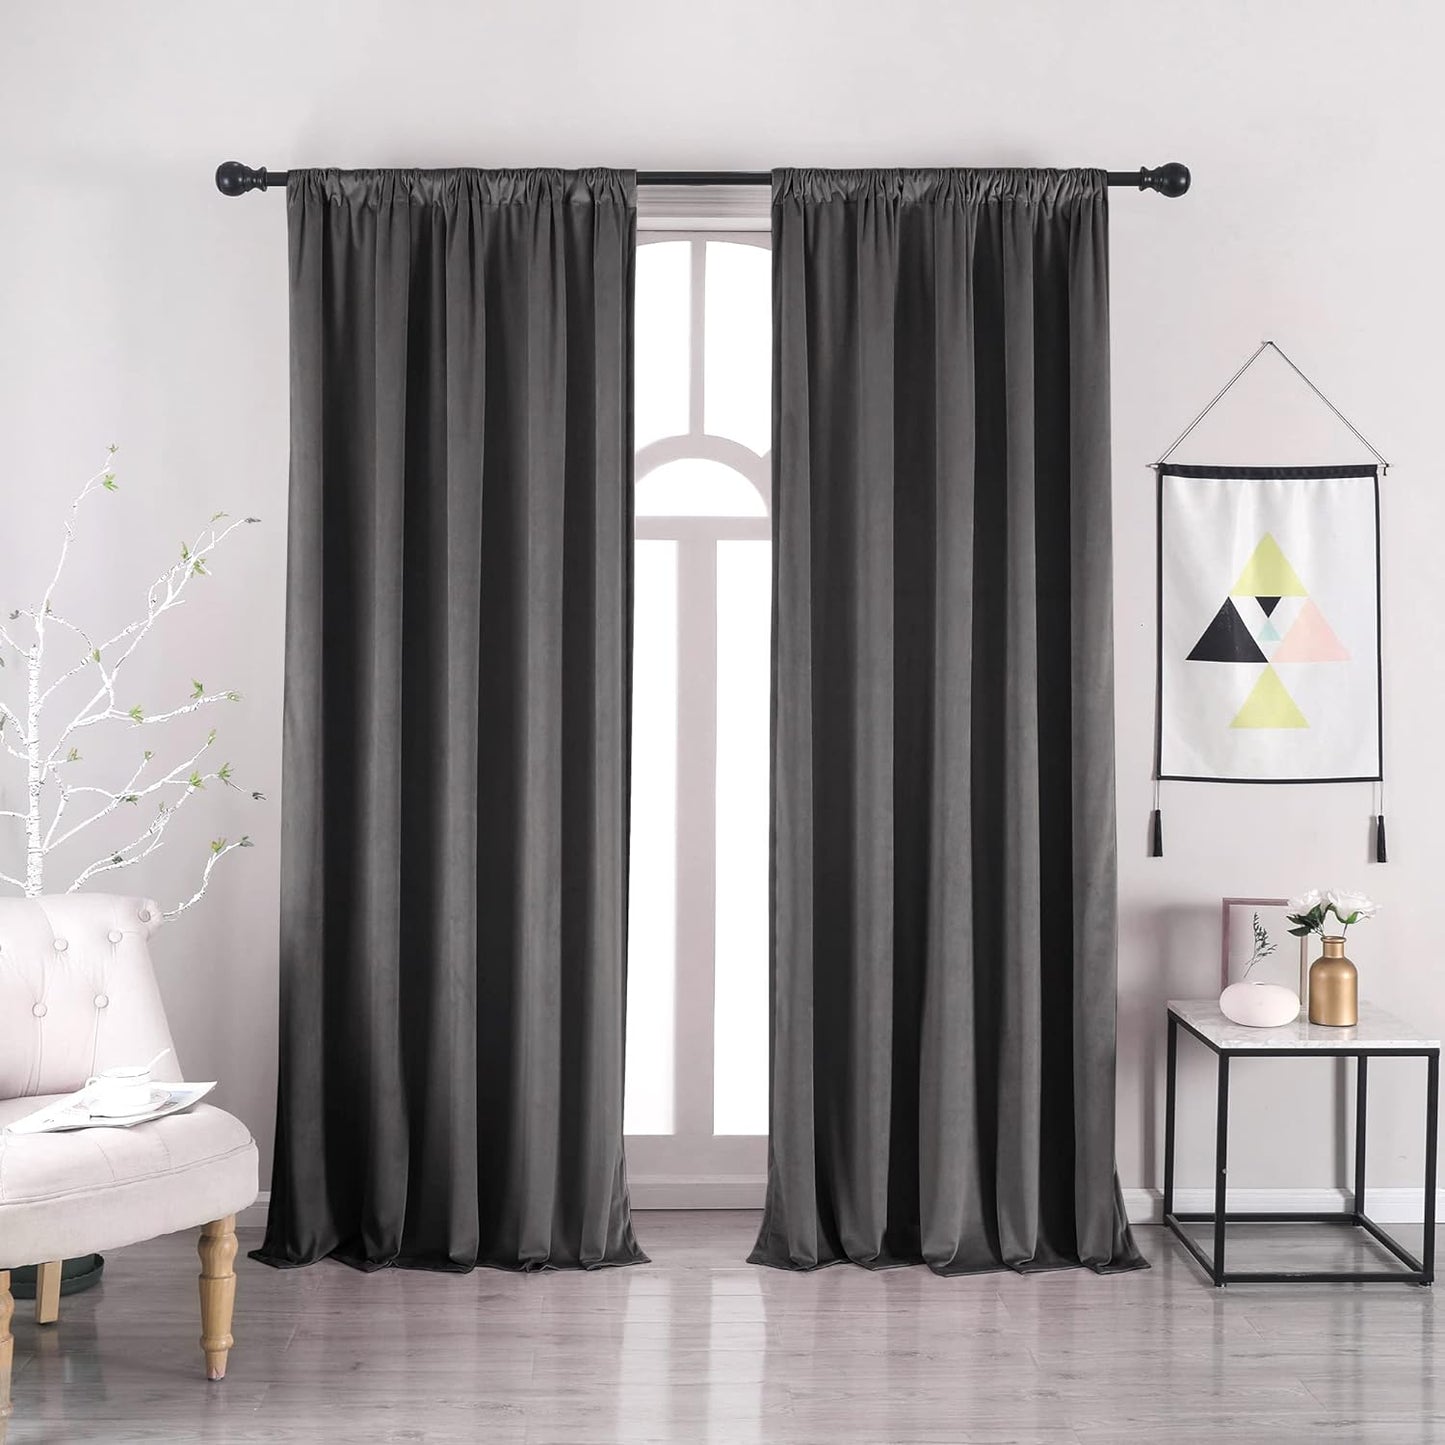 Nanbowang Green Velvet Curtains 63 Inches Long Dark Green Light Blocking Rod Pocket Window Curtain Panels Set of 2 Heat Insulated Curtains Thermal Curtain Panels for Bedroom  nanbowang Dark Grey 52"X96" 